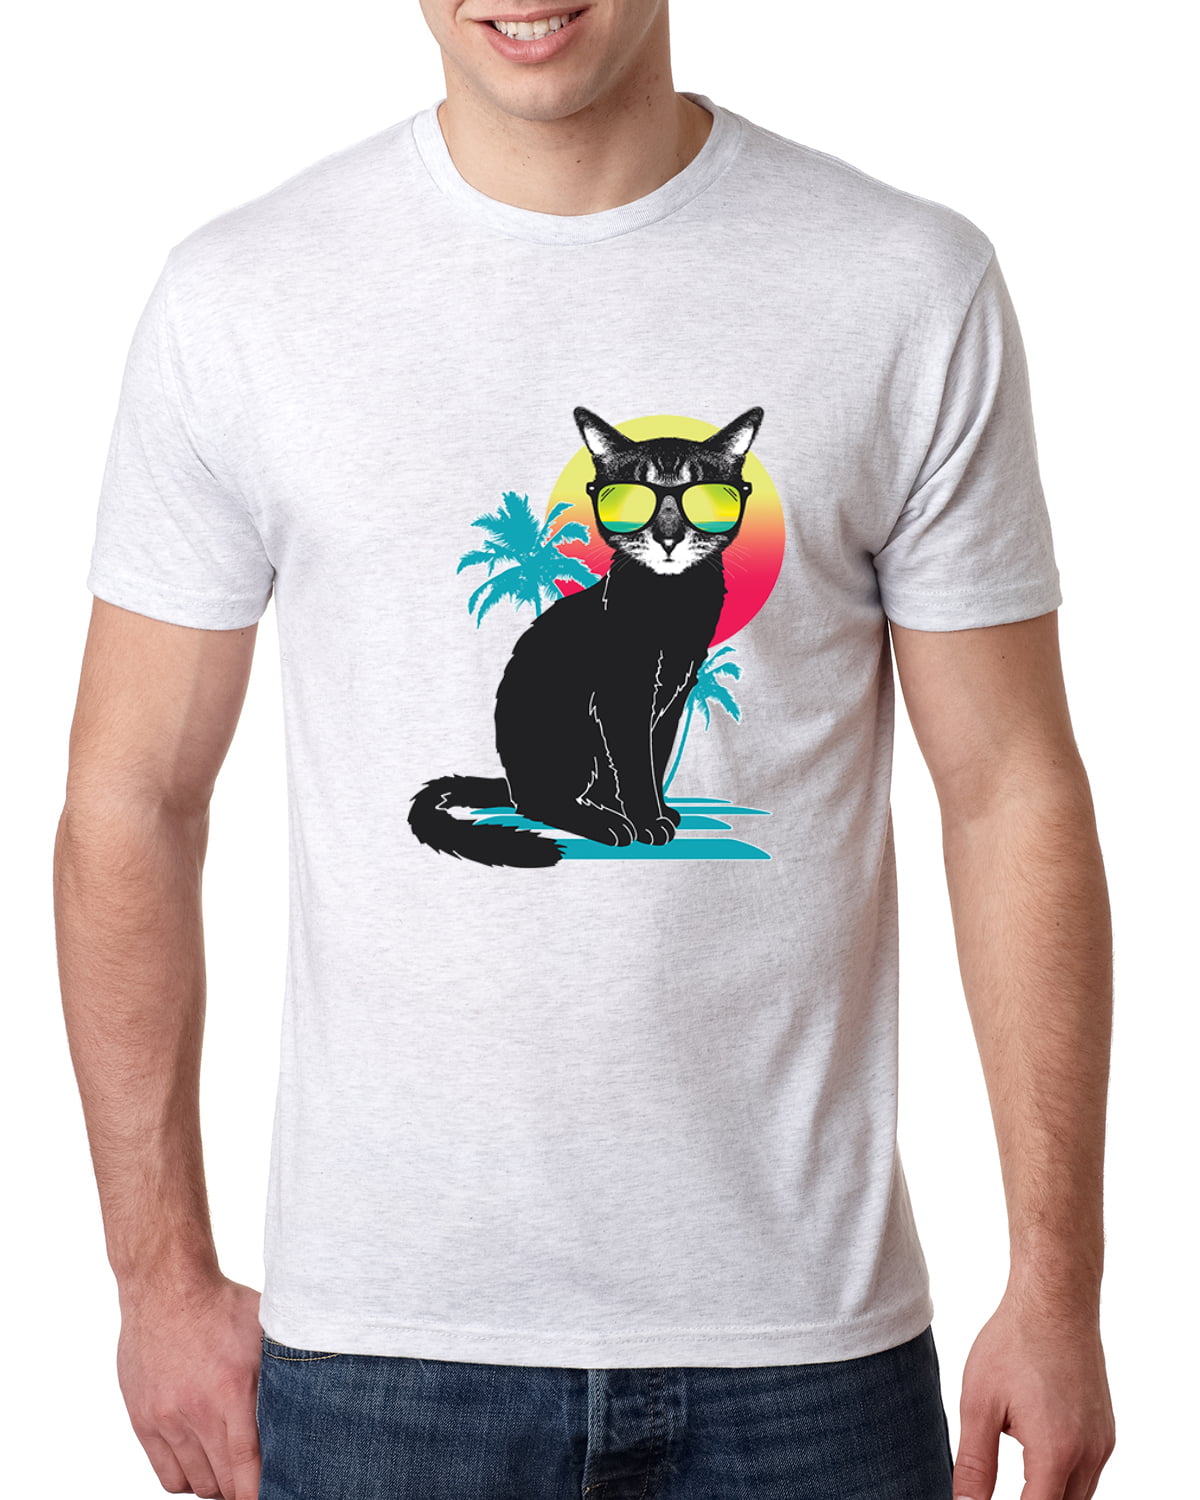 Catzilla Unisex T-Shirt Adult Pop Culture Graphic Nerdy Geeky Apparel 